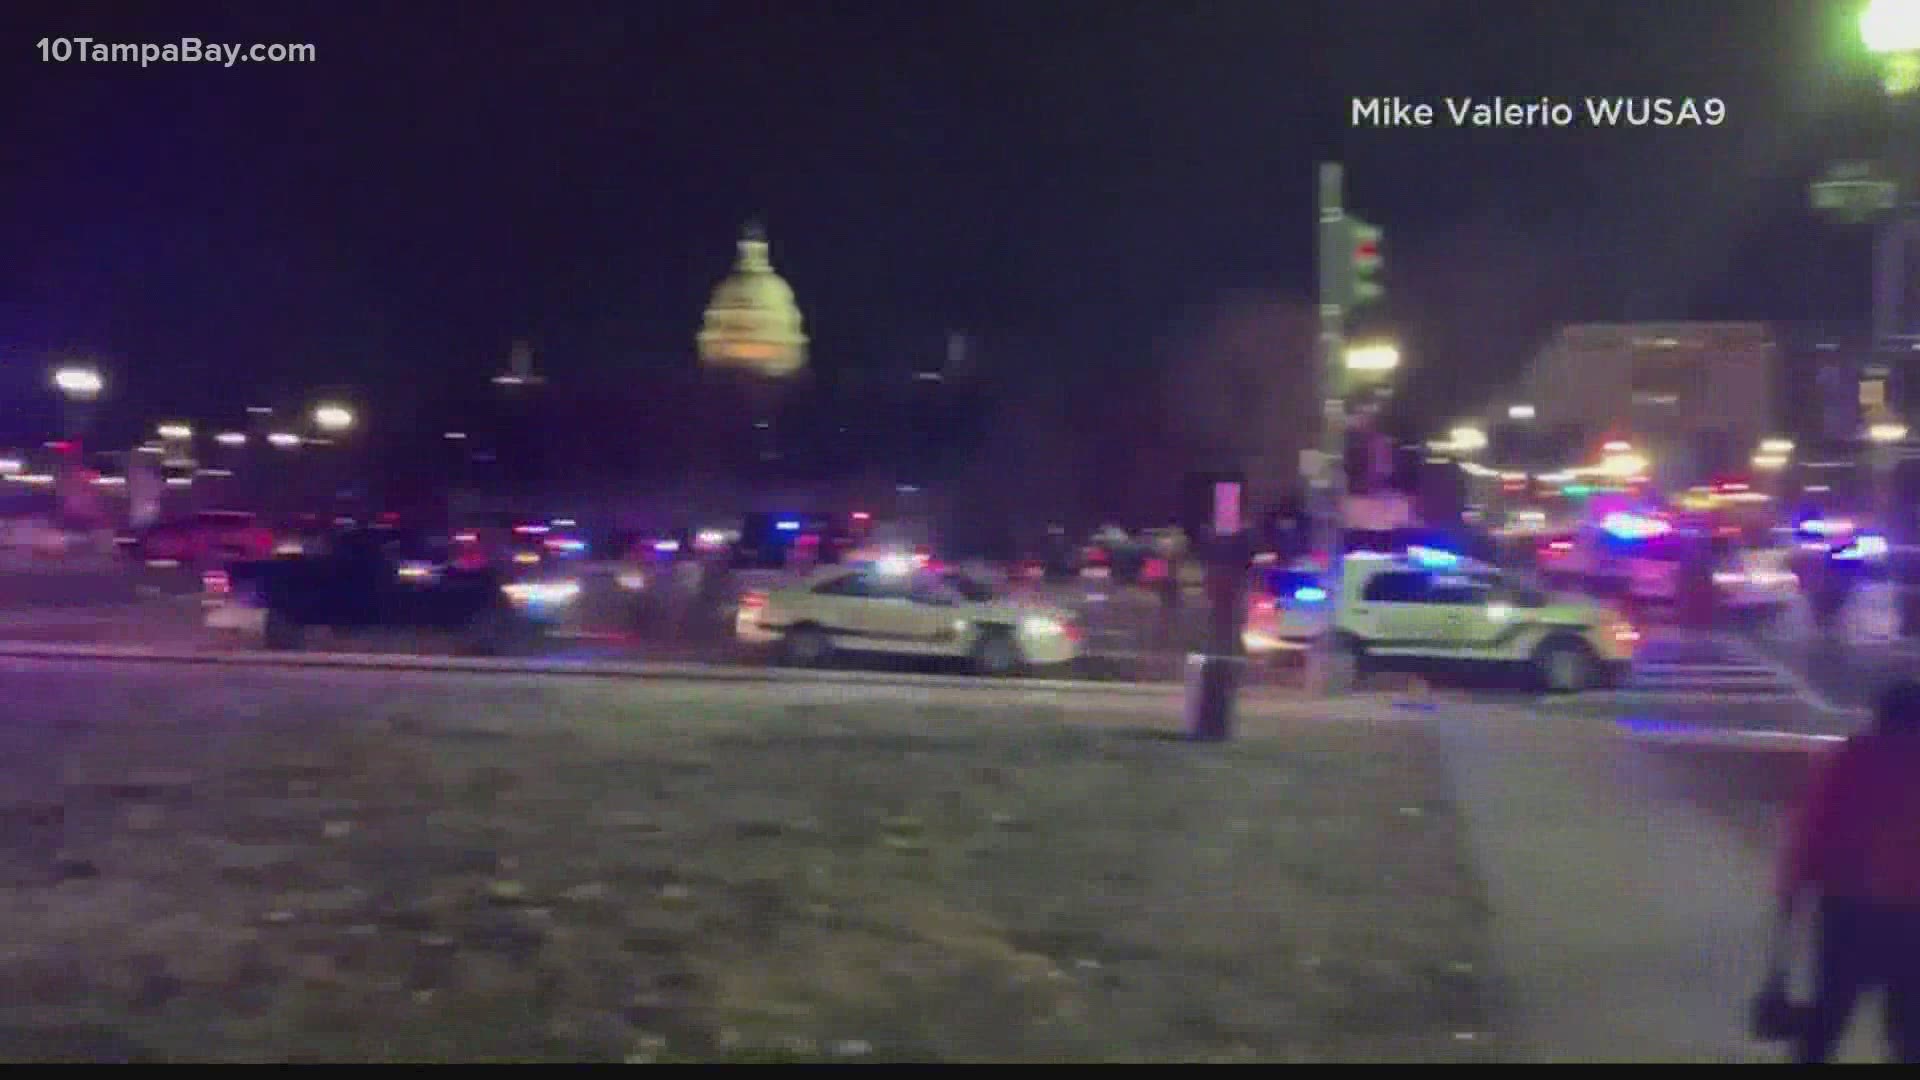 A Capitol Police officer died after police said he suffered injuries during Wednesday's riot involving Trump supporters.